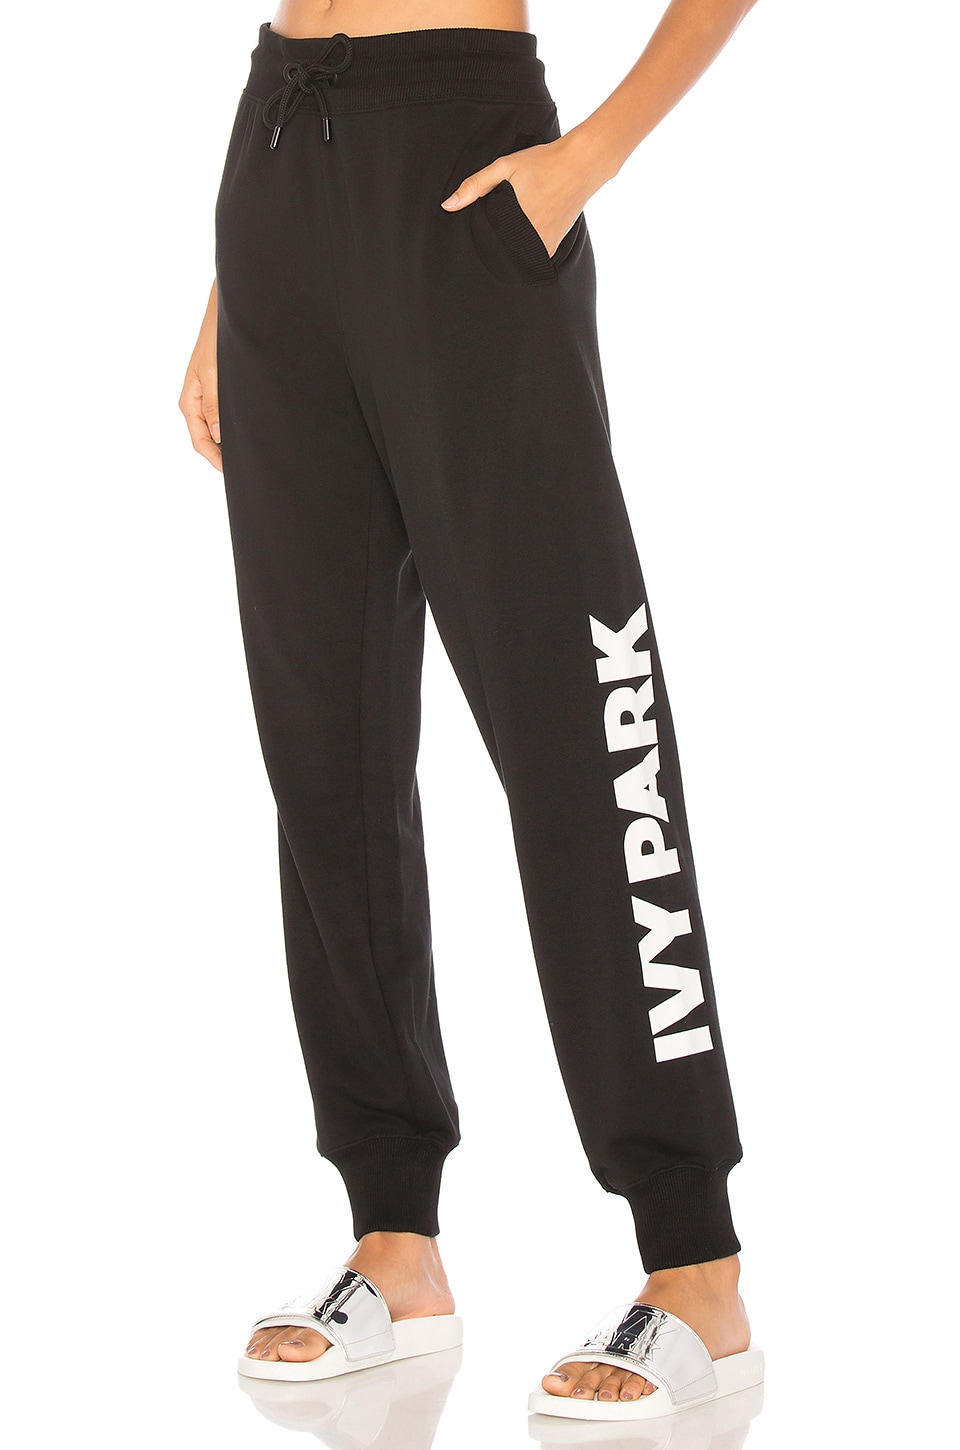 IVY PARK Casual Jogger in Black \u0026 White 